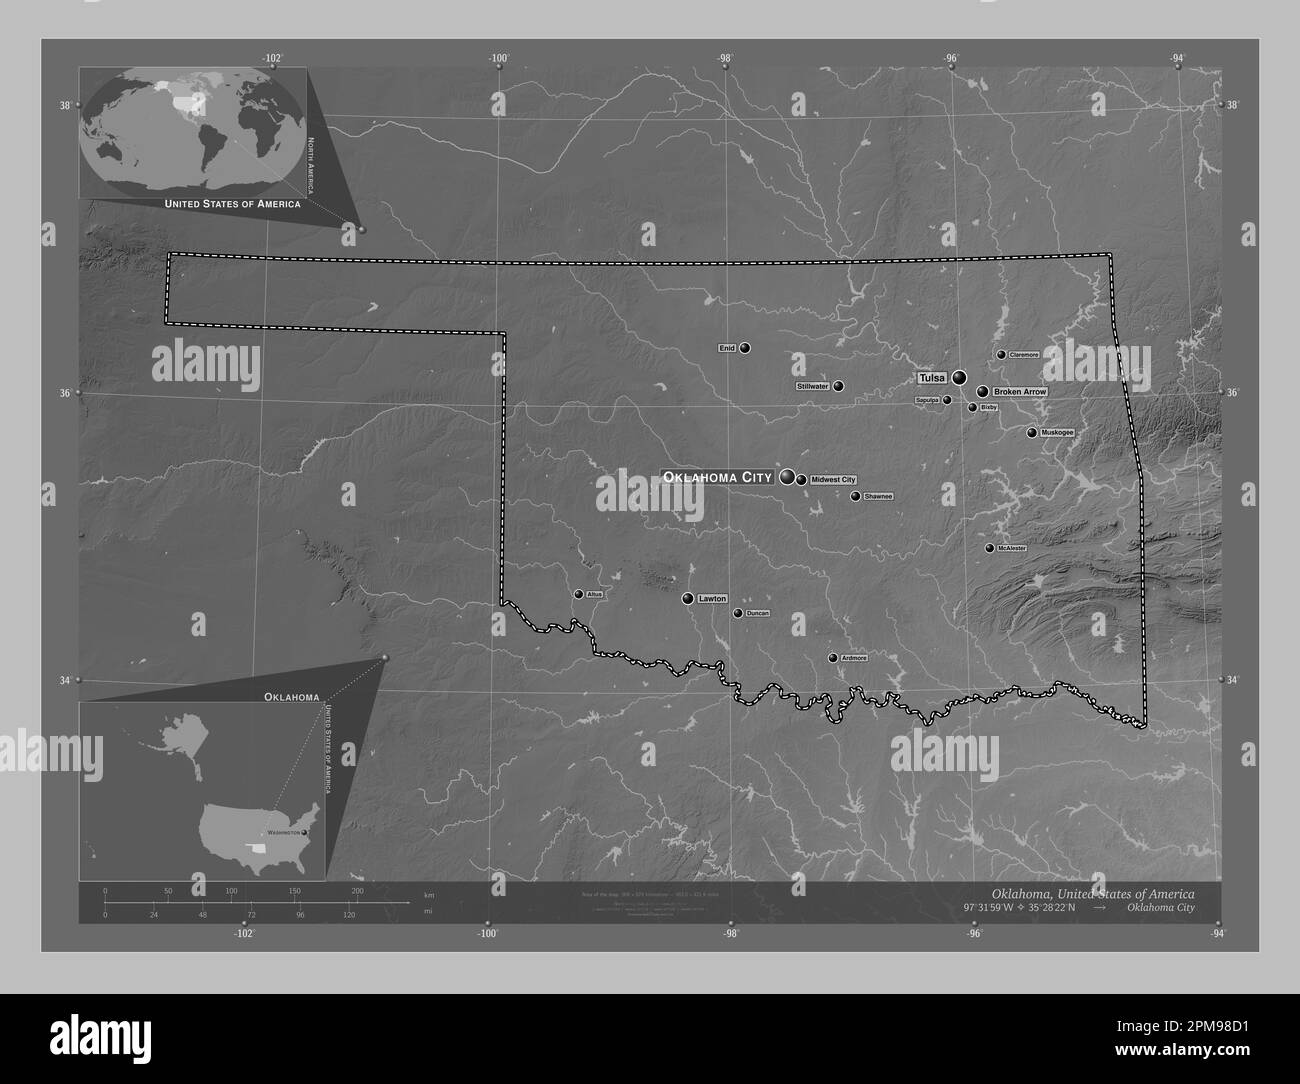 Oklahoma, state of United States of America. Grayscale elevation map with lakes and rivers. Locations and names of major cities of the region. Corner Stock Photo